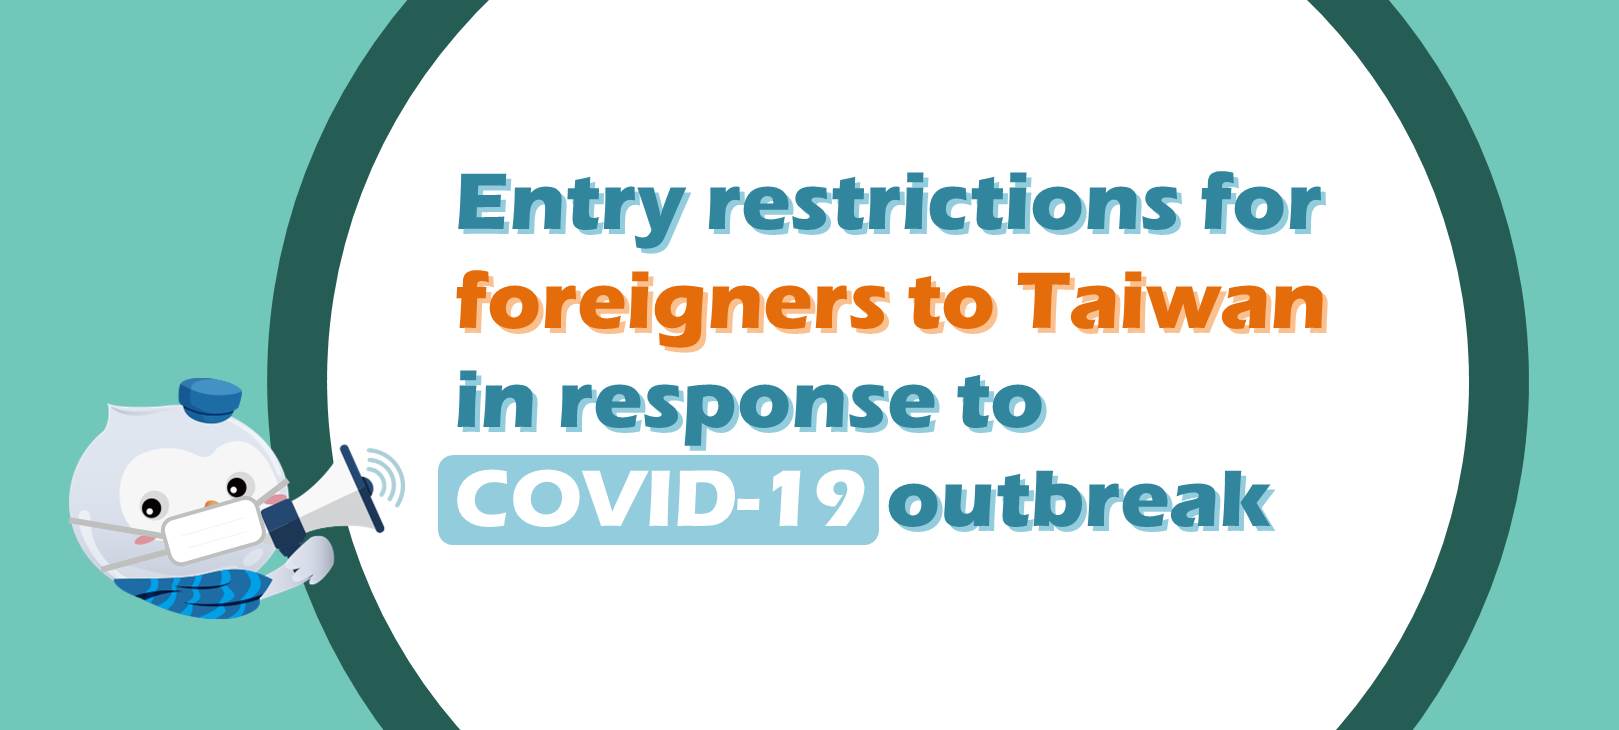 Entry restrictions for foreigners to Taiwan in response to COVID-19 outbreak